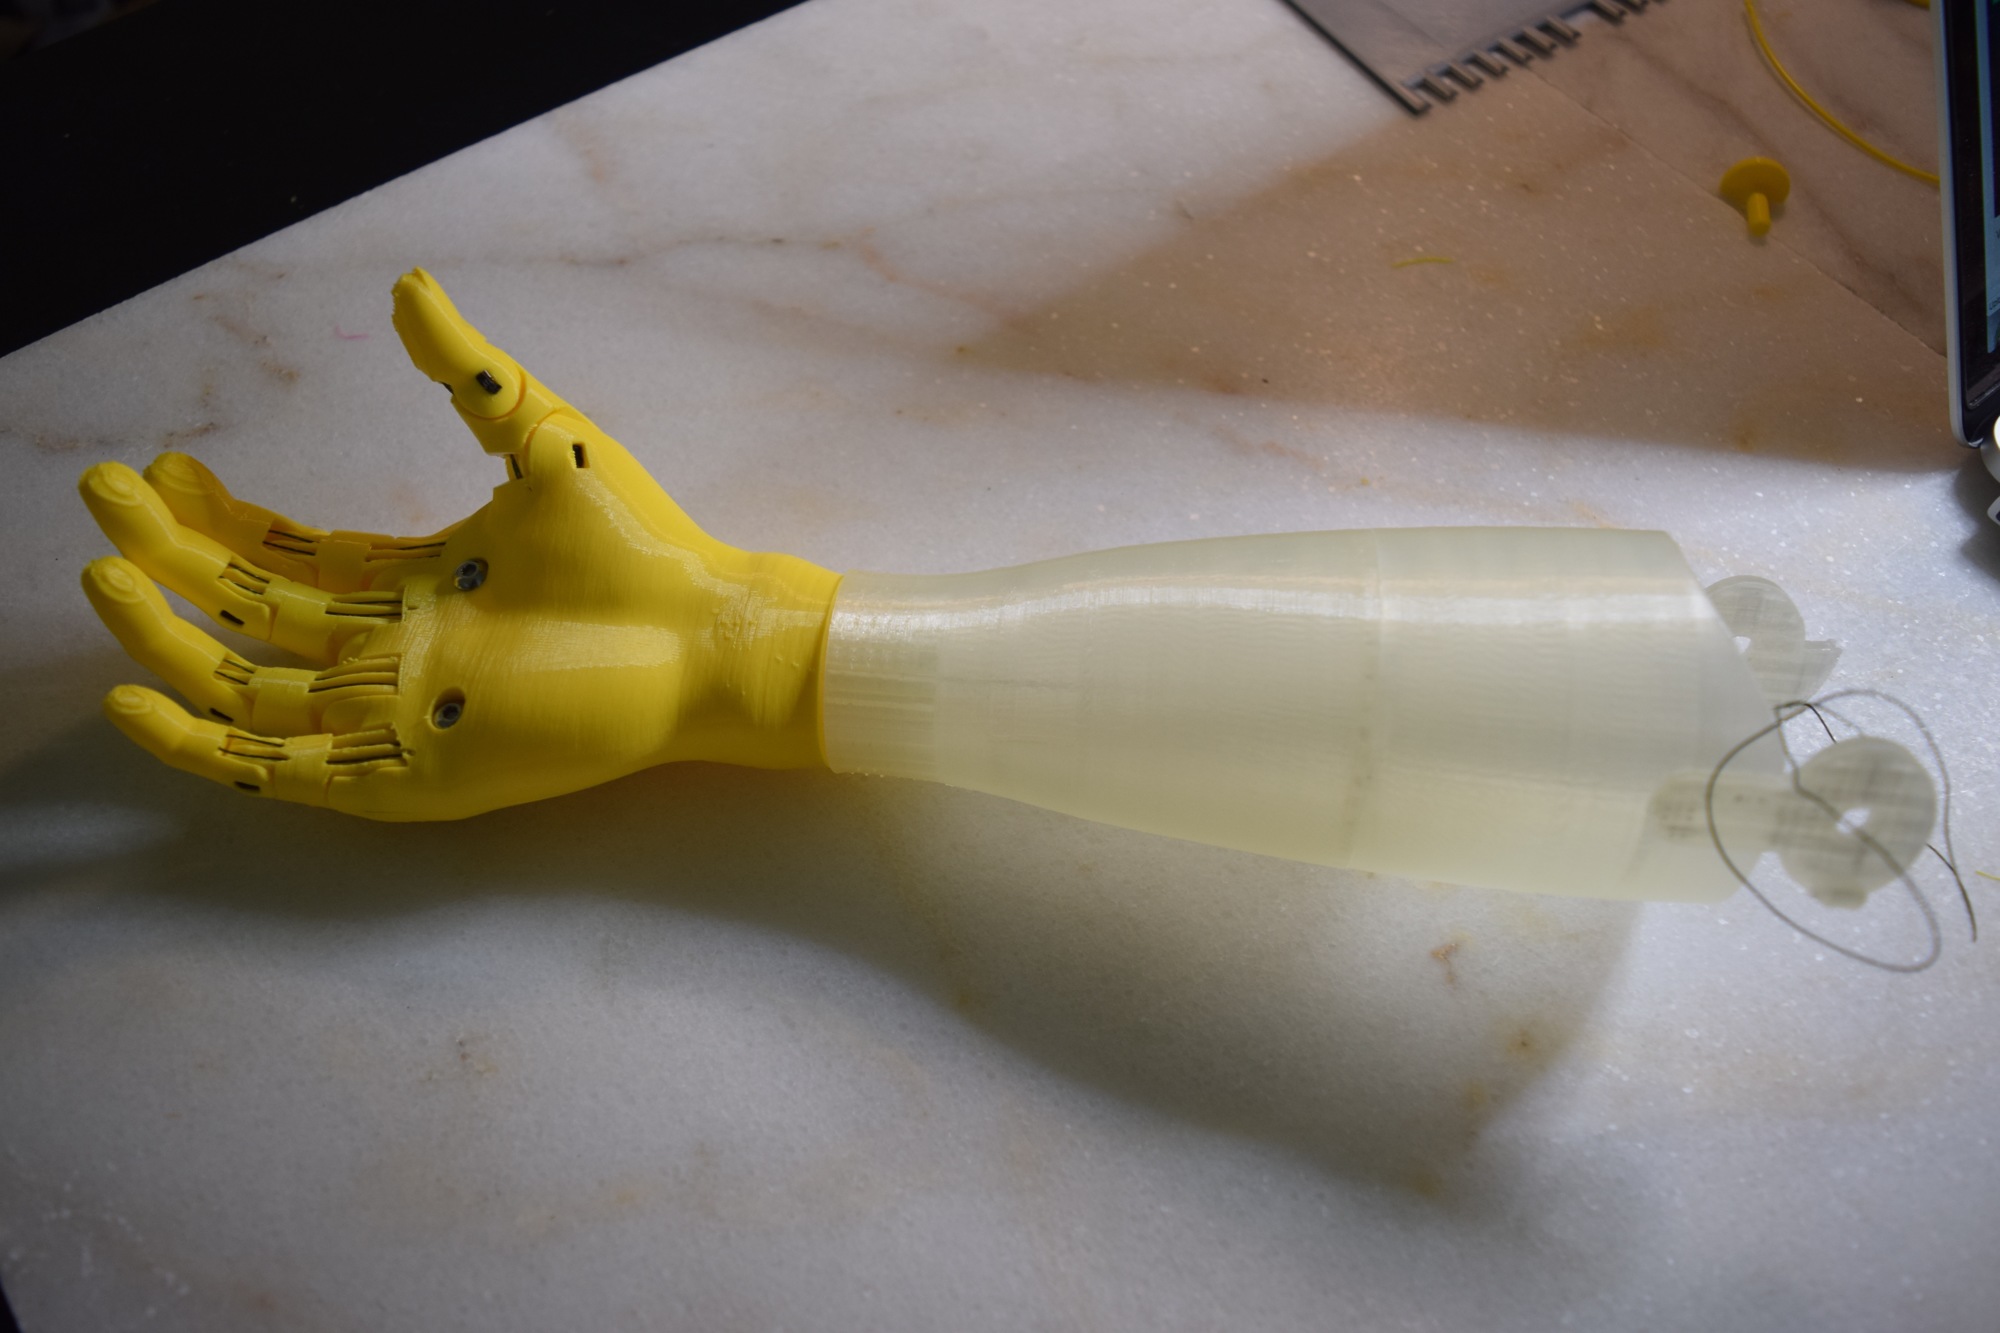 This 3D-printed arm is similar to the one Maxwell created for 5-year-old Blakeley in Oregon.